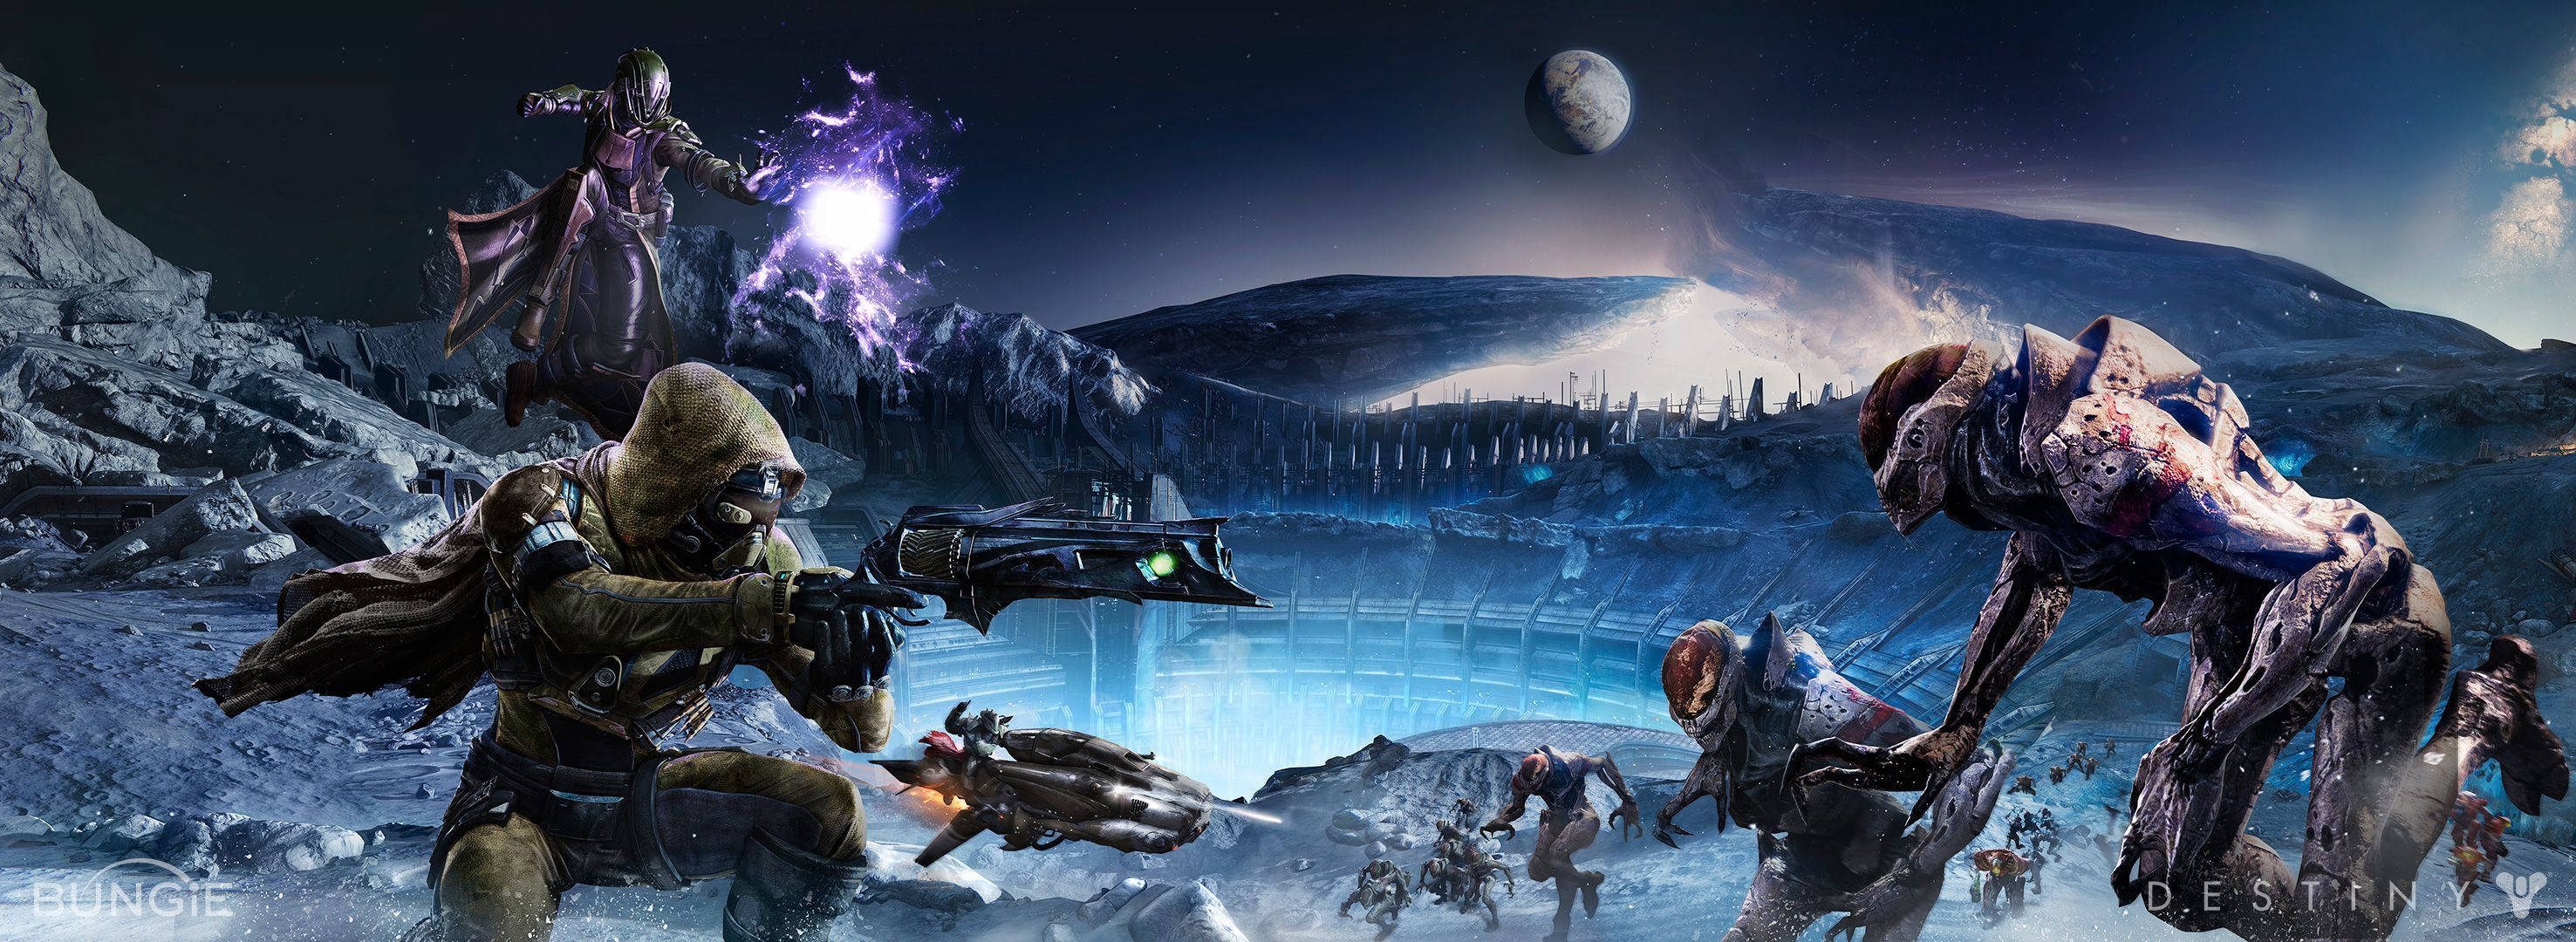 Destiny Guardians Vs Hive In The Moon Background